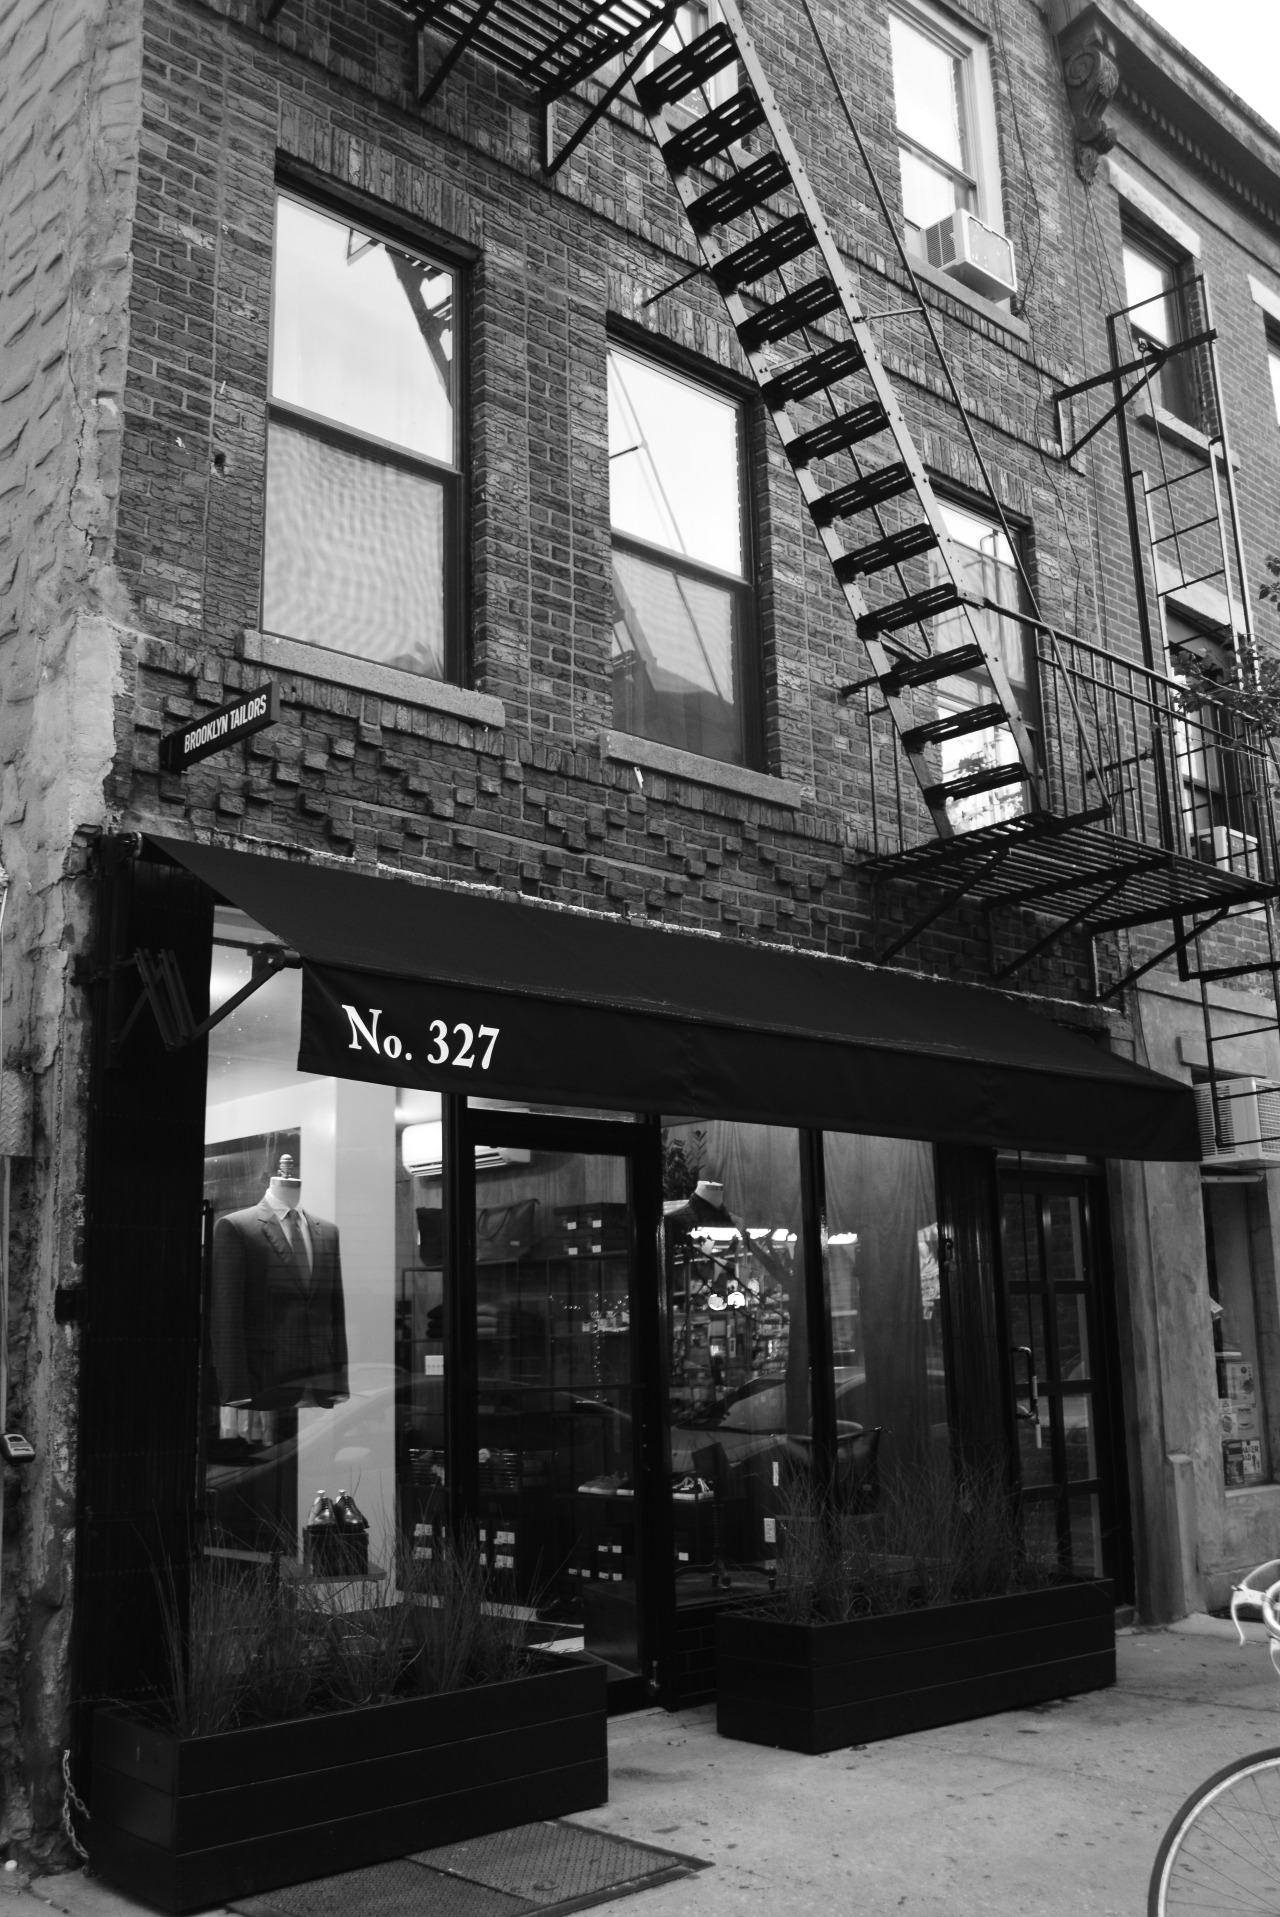 Black and white image of the Brooklyn Tailors storefront in Williamsburg